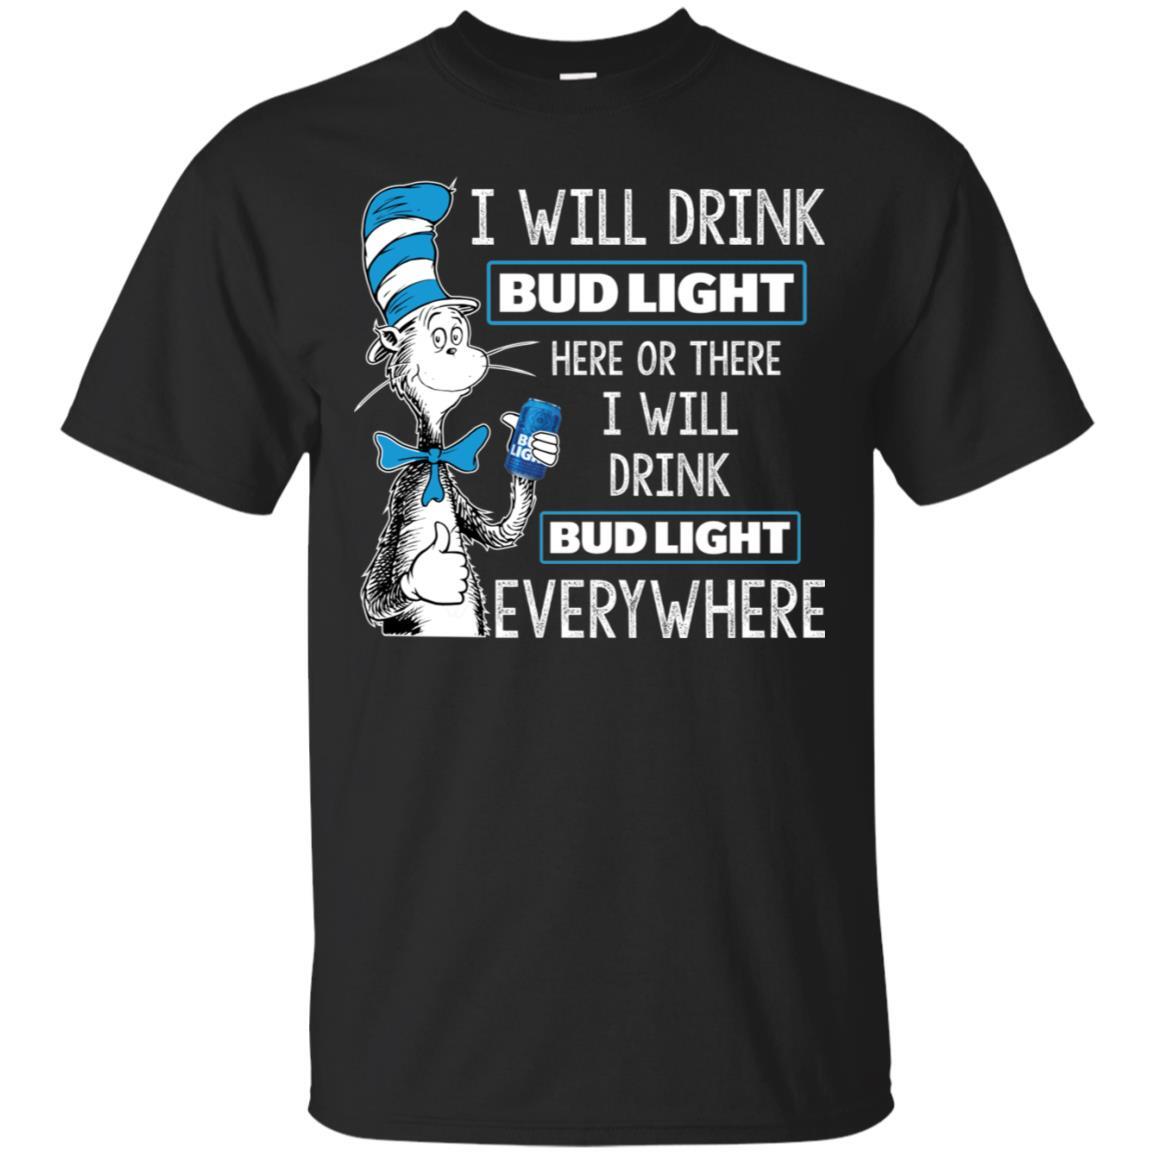 I Will Drink Bud Light Here or There Everywhere T-Shirt